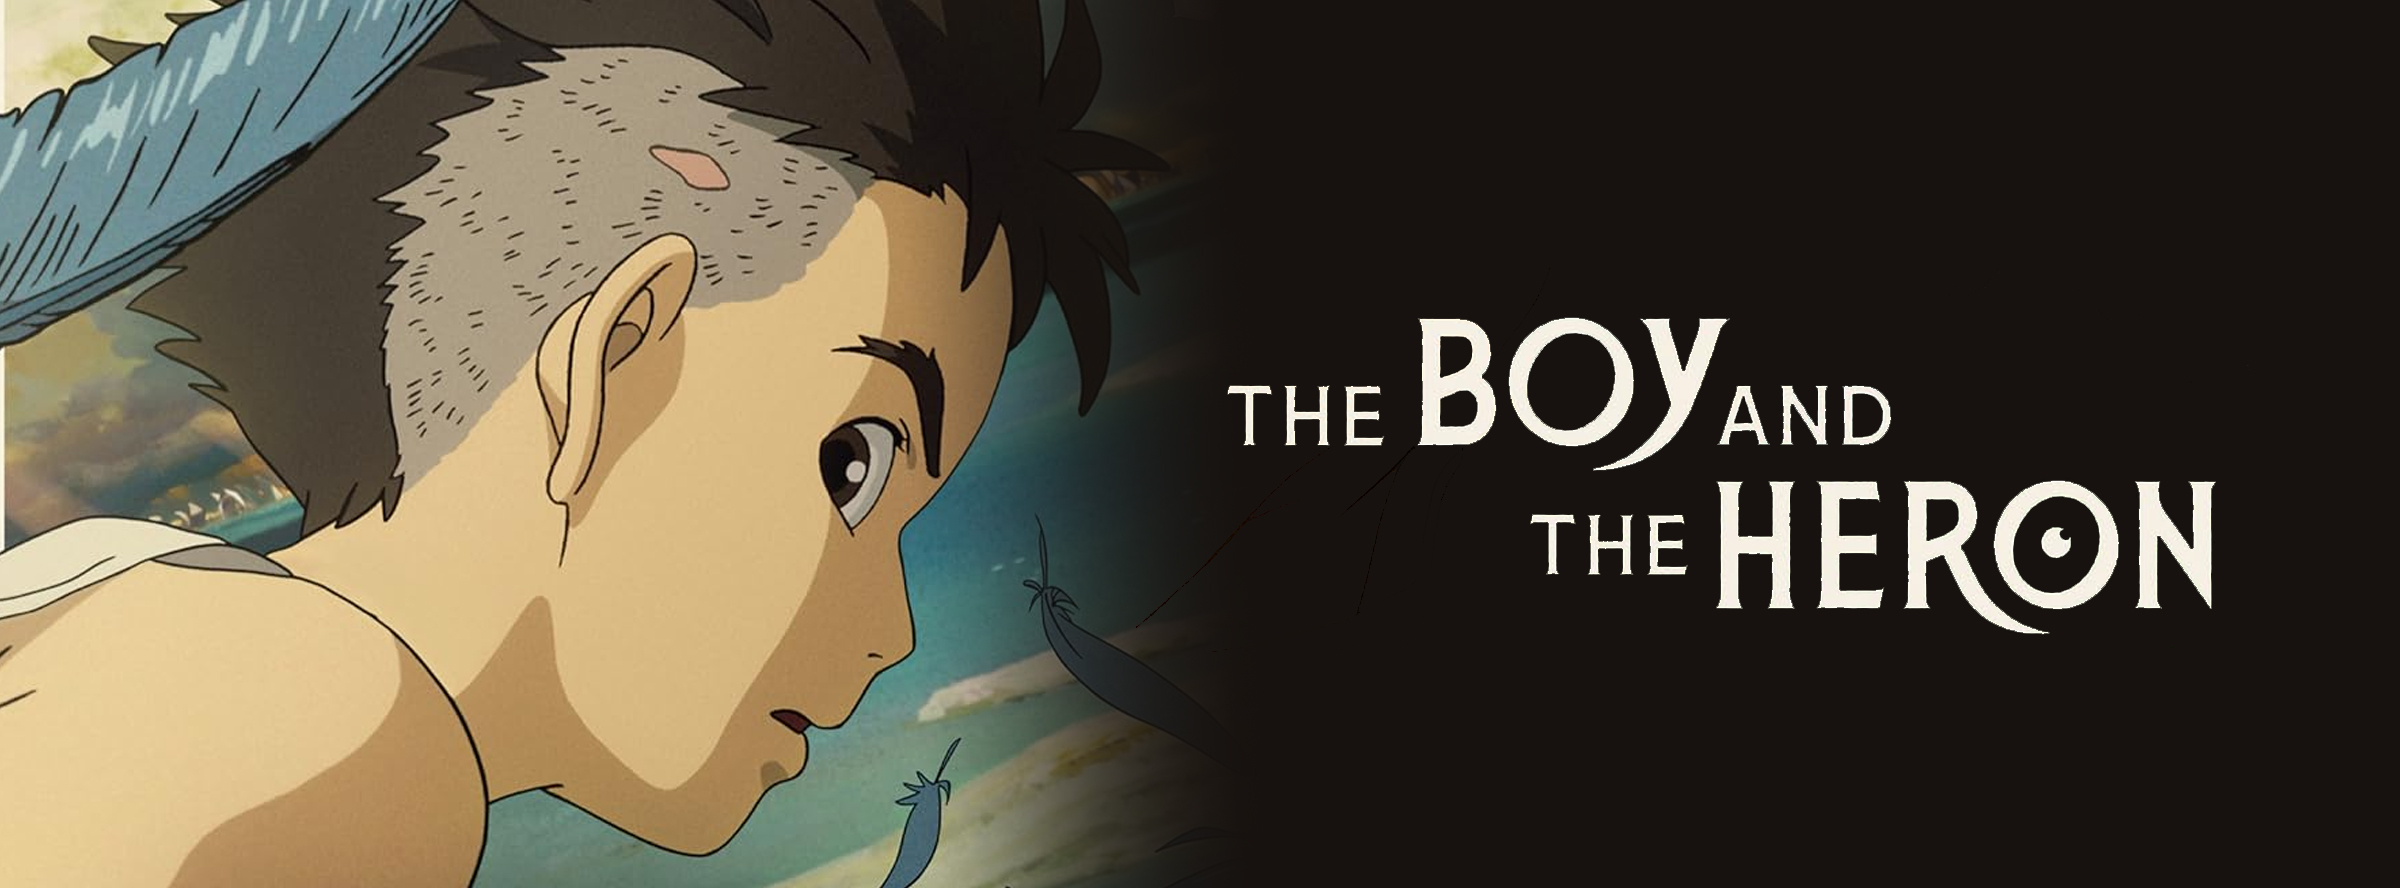 Slider Image for Boy and the Heron, The                                                     